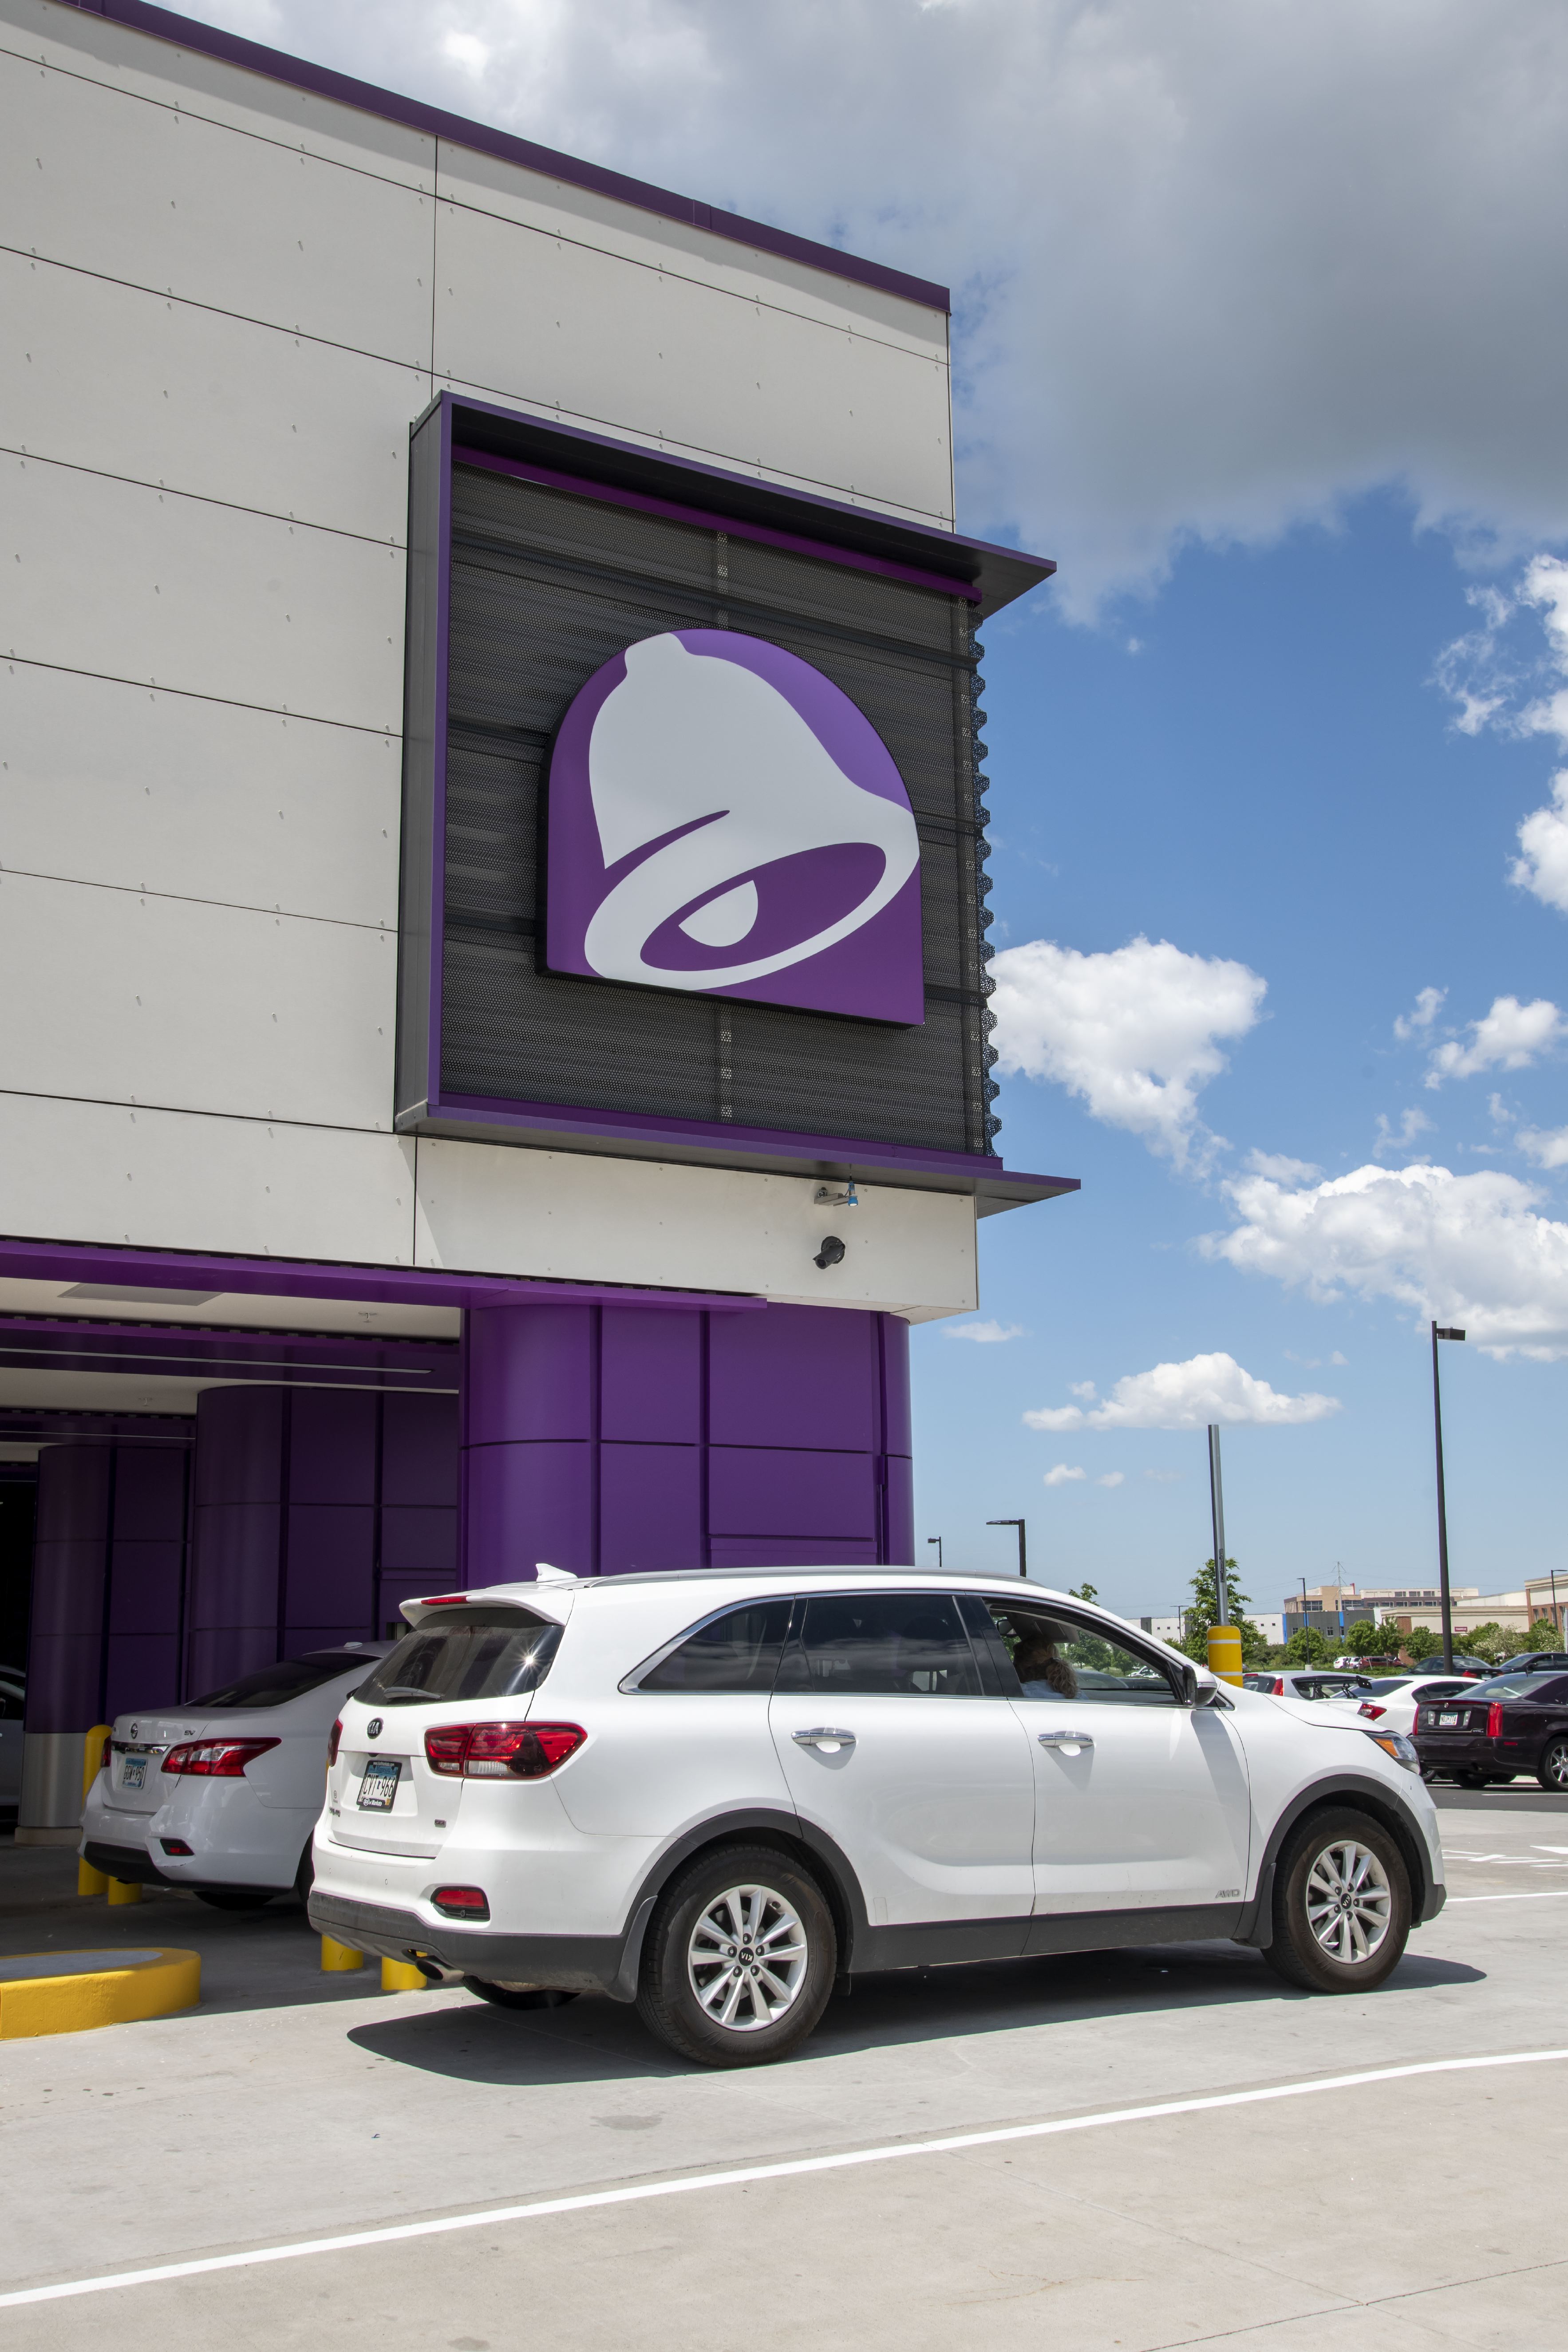 Two story Taco Bell Defy is the first-of-its-kind restaurant that has multiple drive-thru lanes and uses a proprietary lift system to deliver food